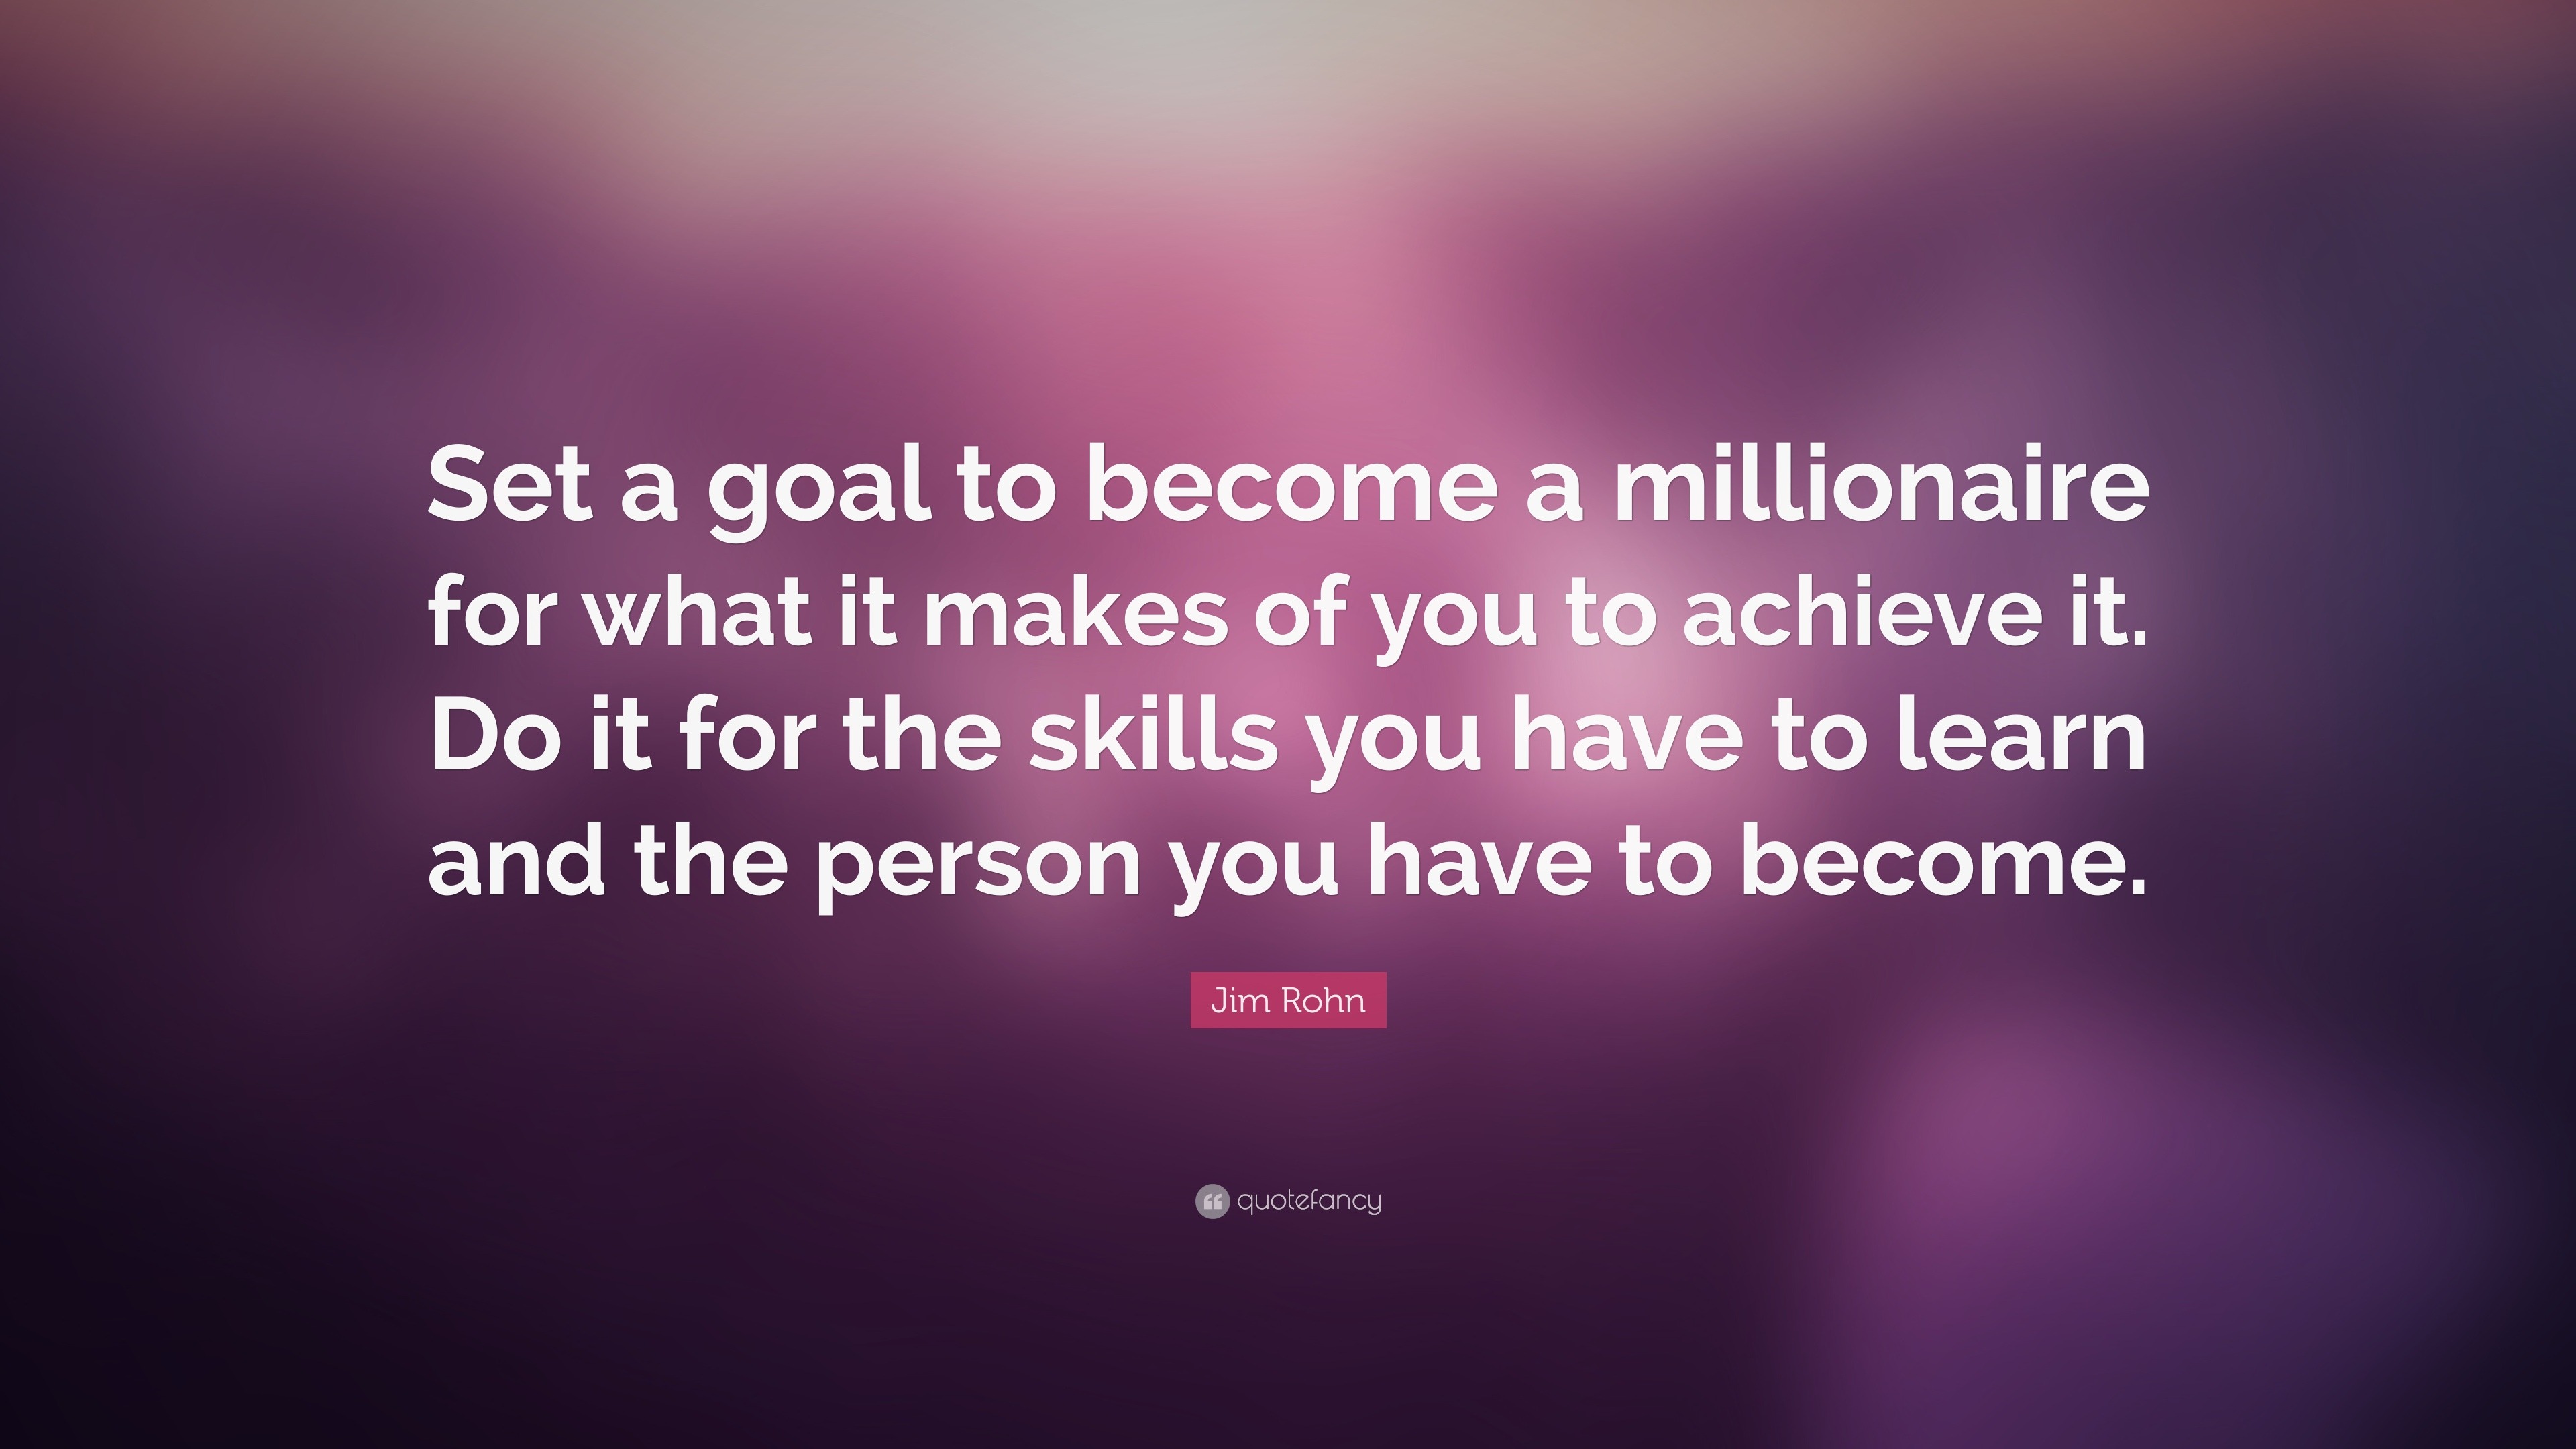 Jim Rohn Quote: “Set a goal to become a millionaire for what it makes ...